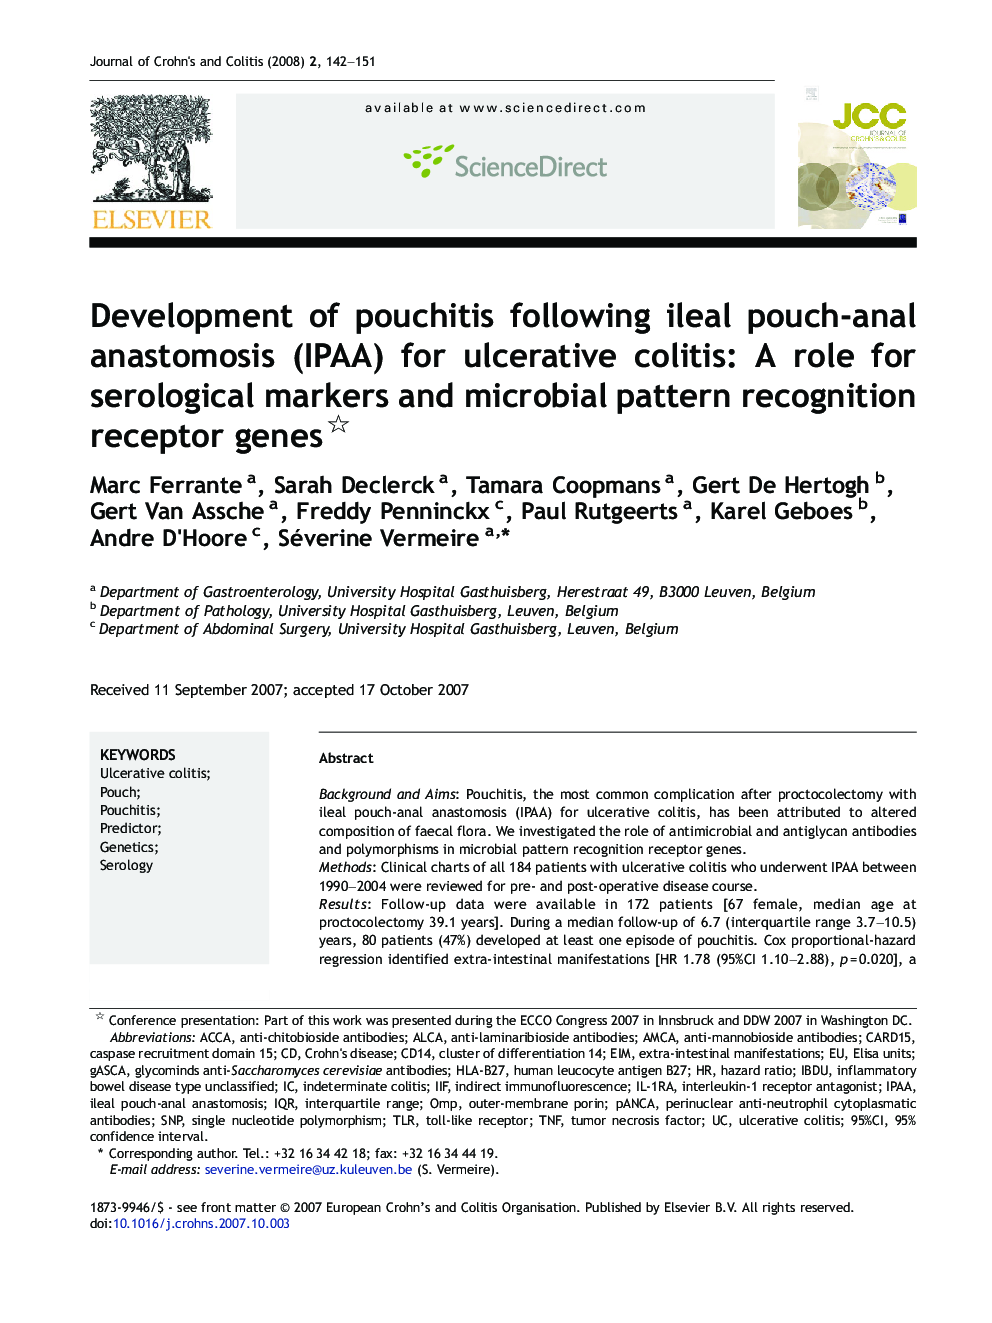 Development of pouchitis following ileal pouch-anal anastomosis (IPAA) for ulcerative colitis: A role for serological markers and microbial pattern recognition receptor genes